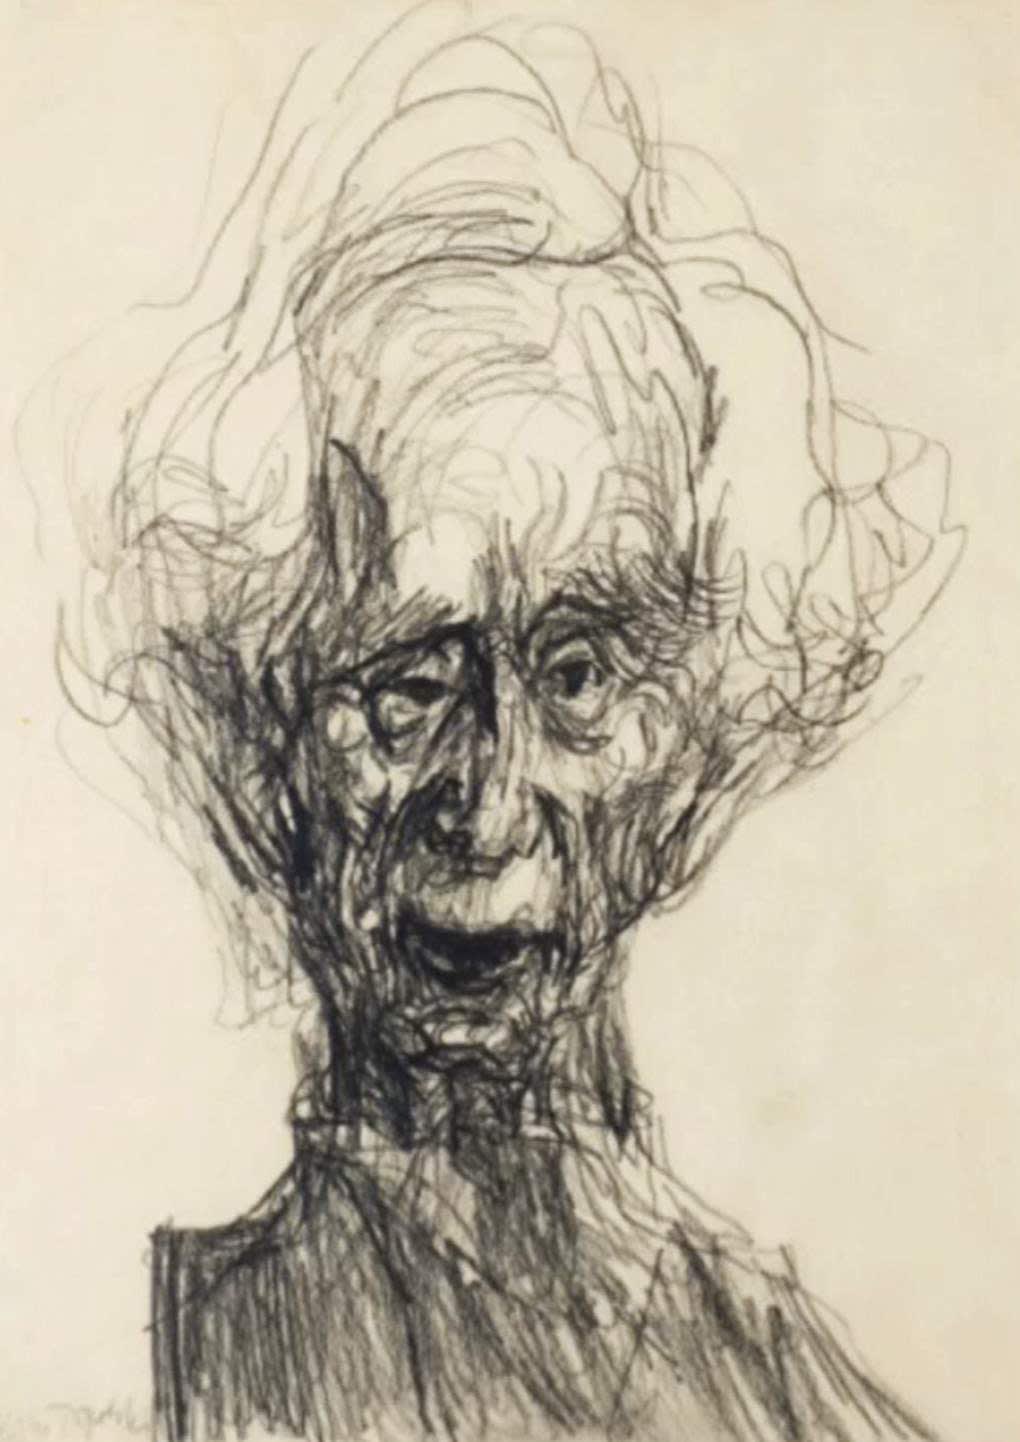 Feliks Topolski (1907-1989) Portrait of Bertrand Russell 1957 Pencil on paper 30 x 20 cm Collection of Matthew Bateson To see and discover more about this artist click here